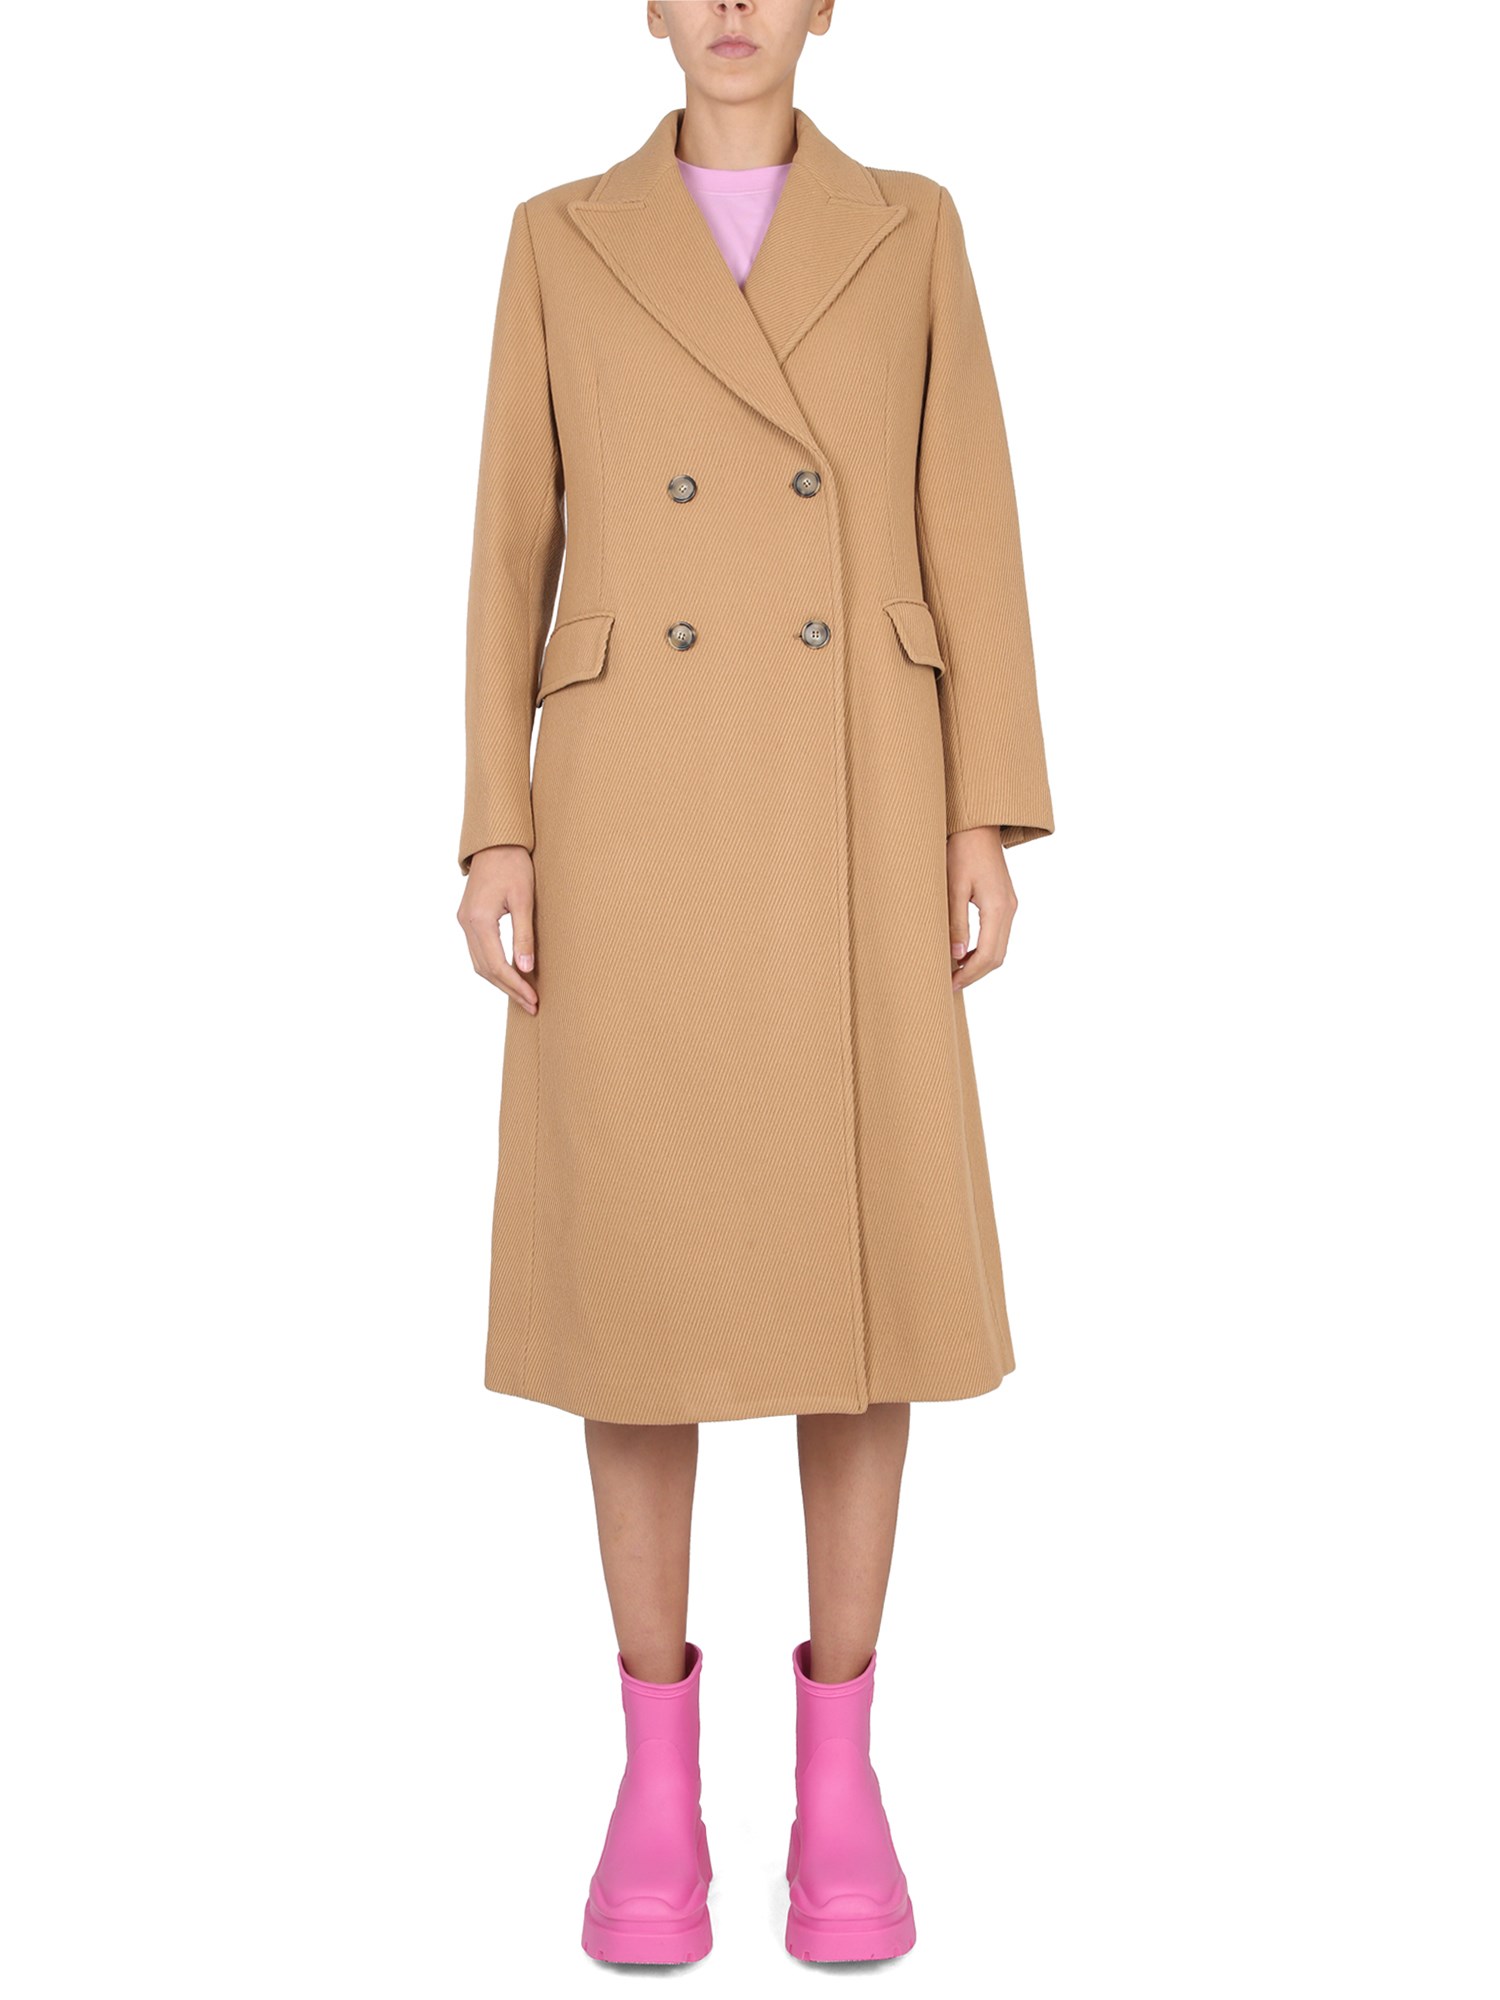 Msgm msgm double-breasted coat